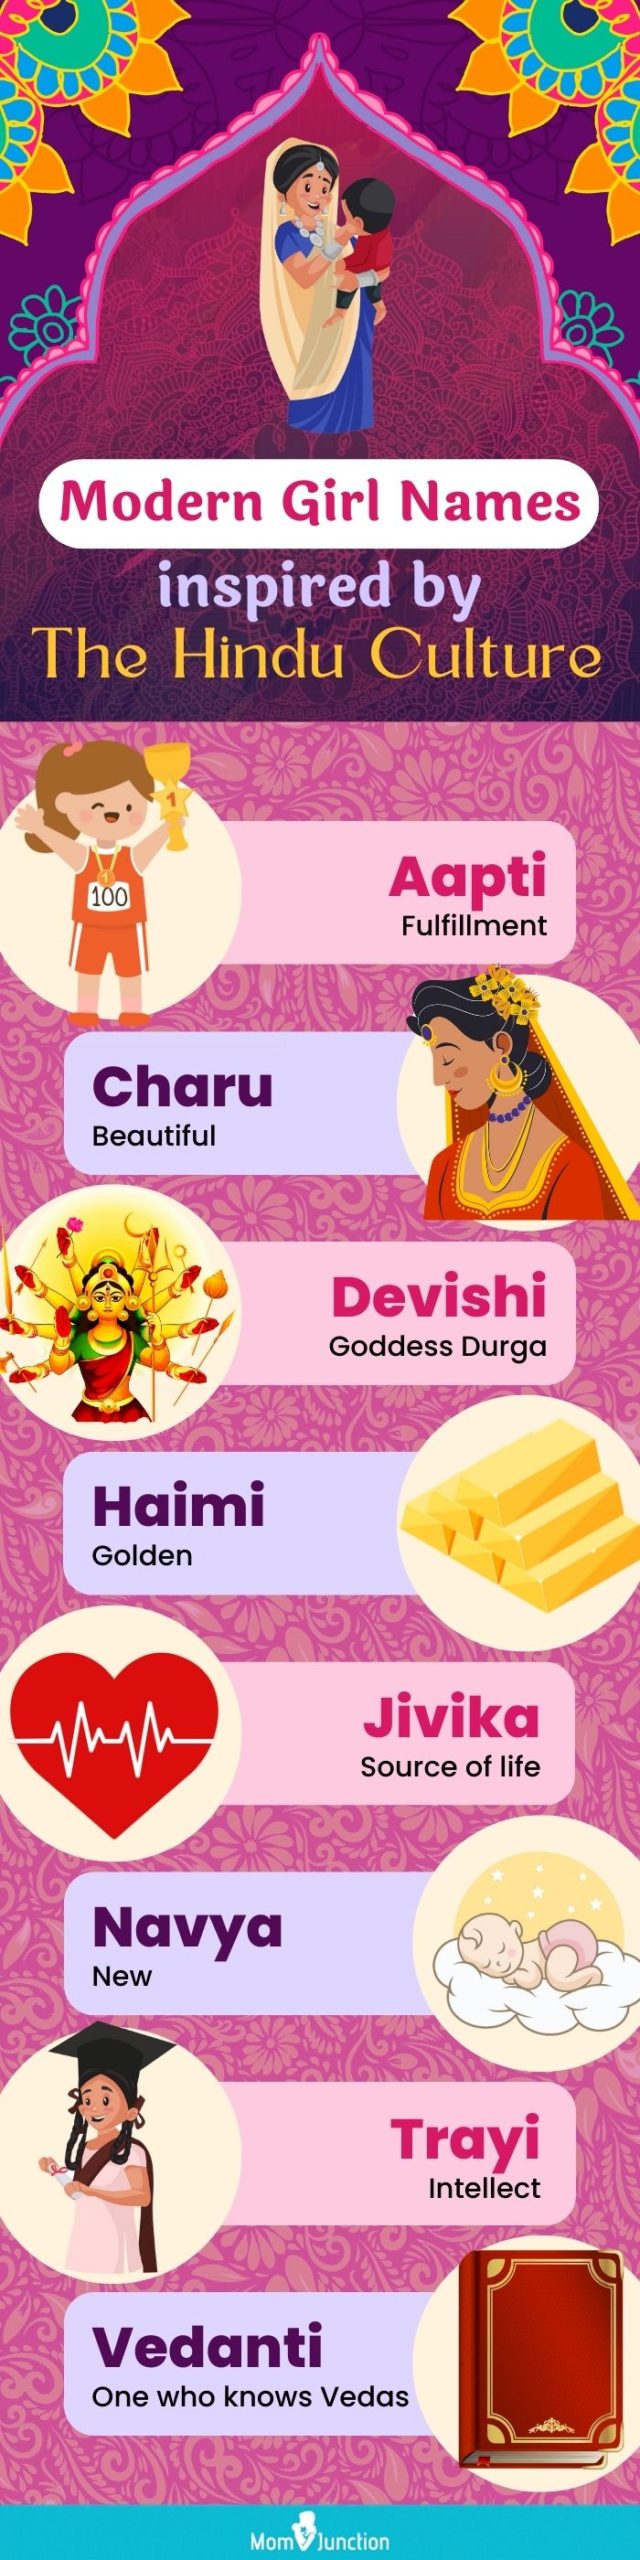 modern girl names inspired by the hindu culture (infographic)